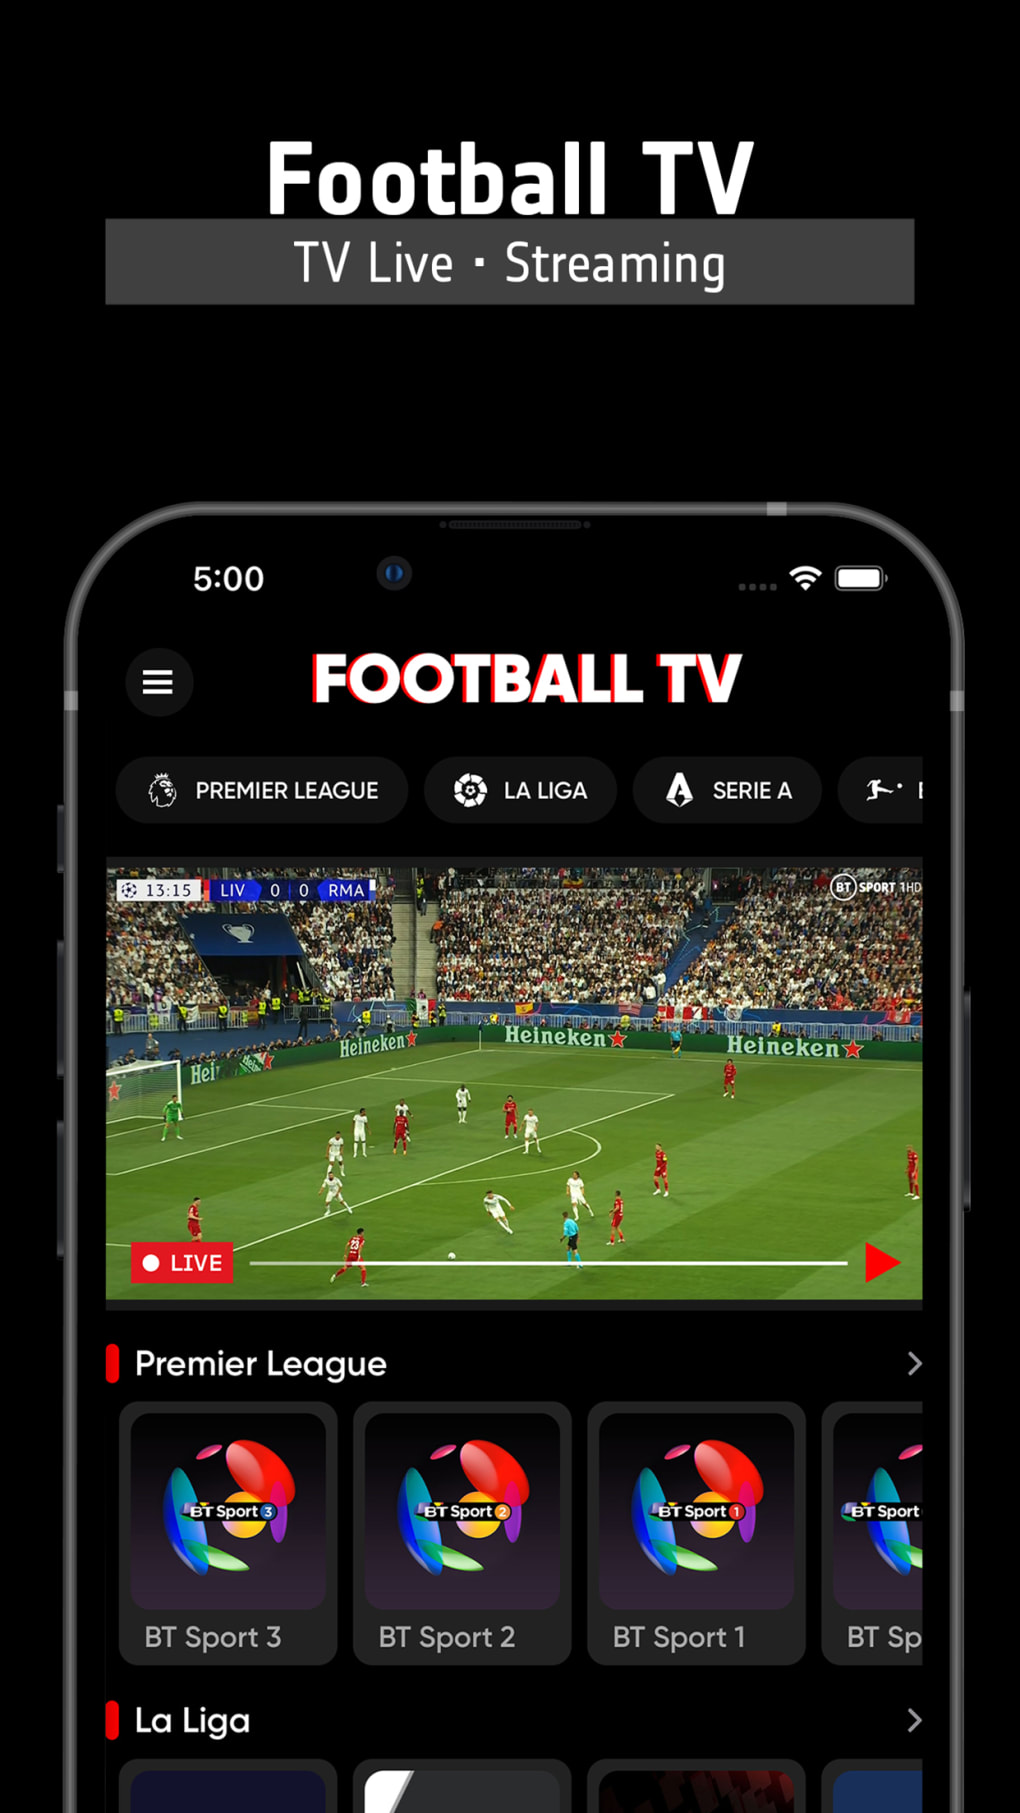 Football TV Live - Streaming for iPhone